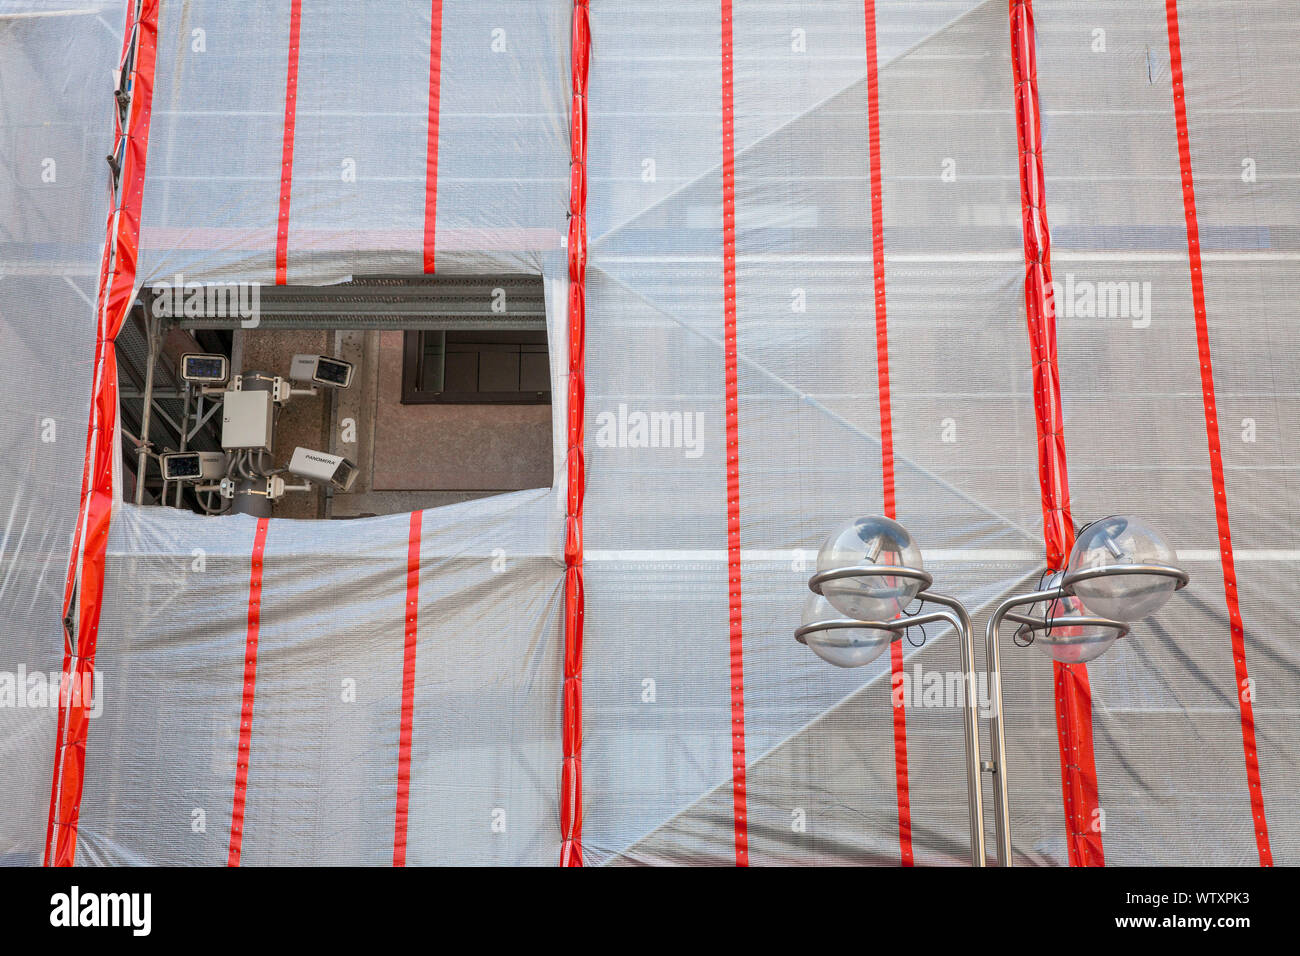 surveillance cameras on the square in front of the cathedral, cutout in scaffolding tarpaulin at the Domforum building, Cologne, Germany.   Ueberwachu Stock Photo